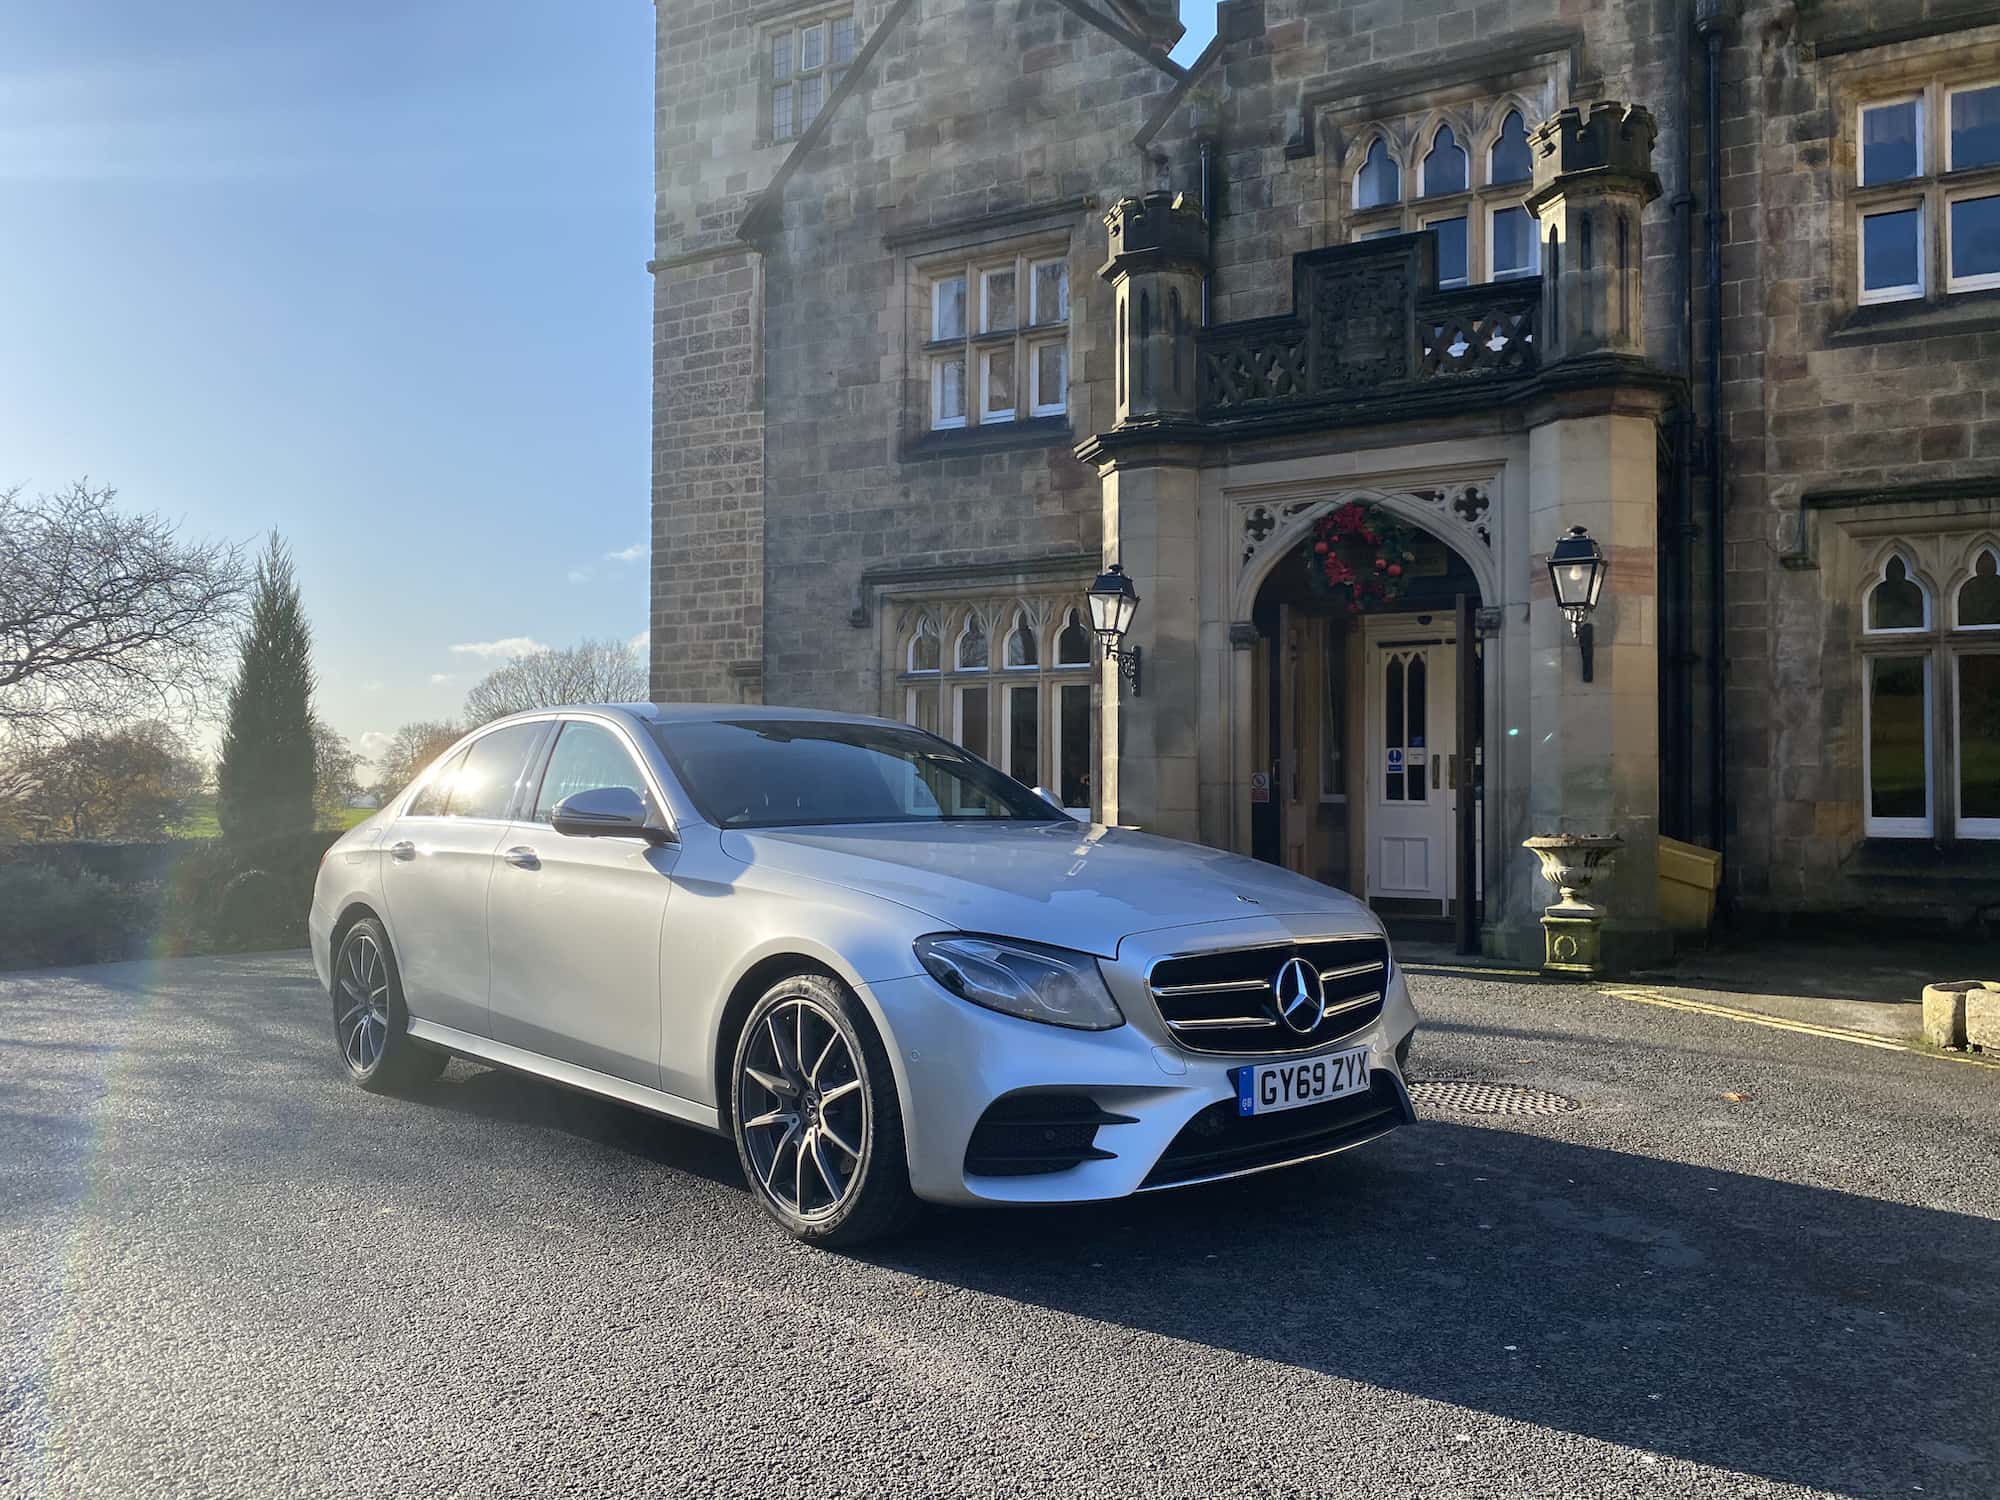 Mercedes E Class picking up at Breadsall Priory chauffeur hire in derby